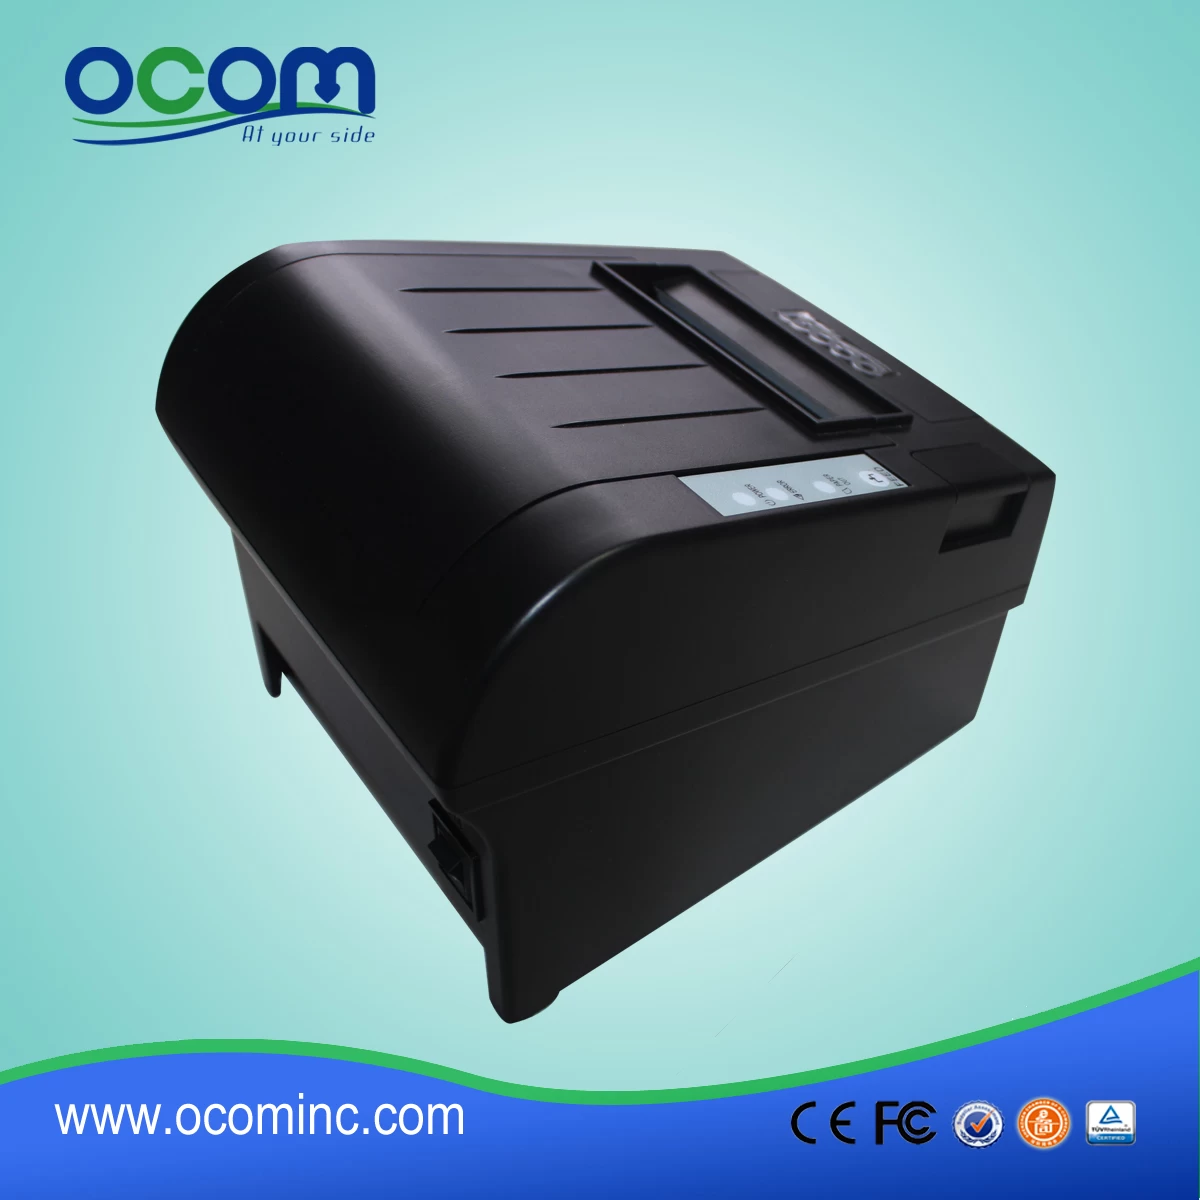 80mm Android Thermal Receipt Printer--OCPP-806